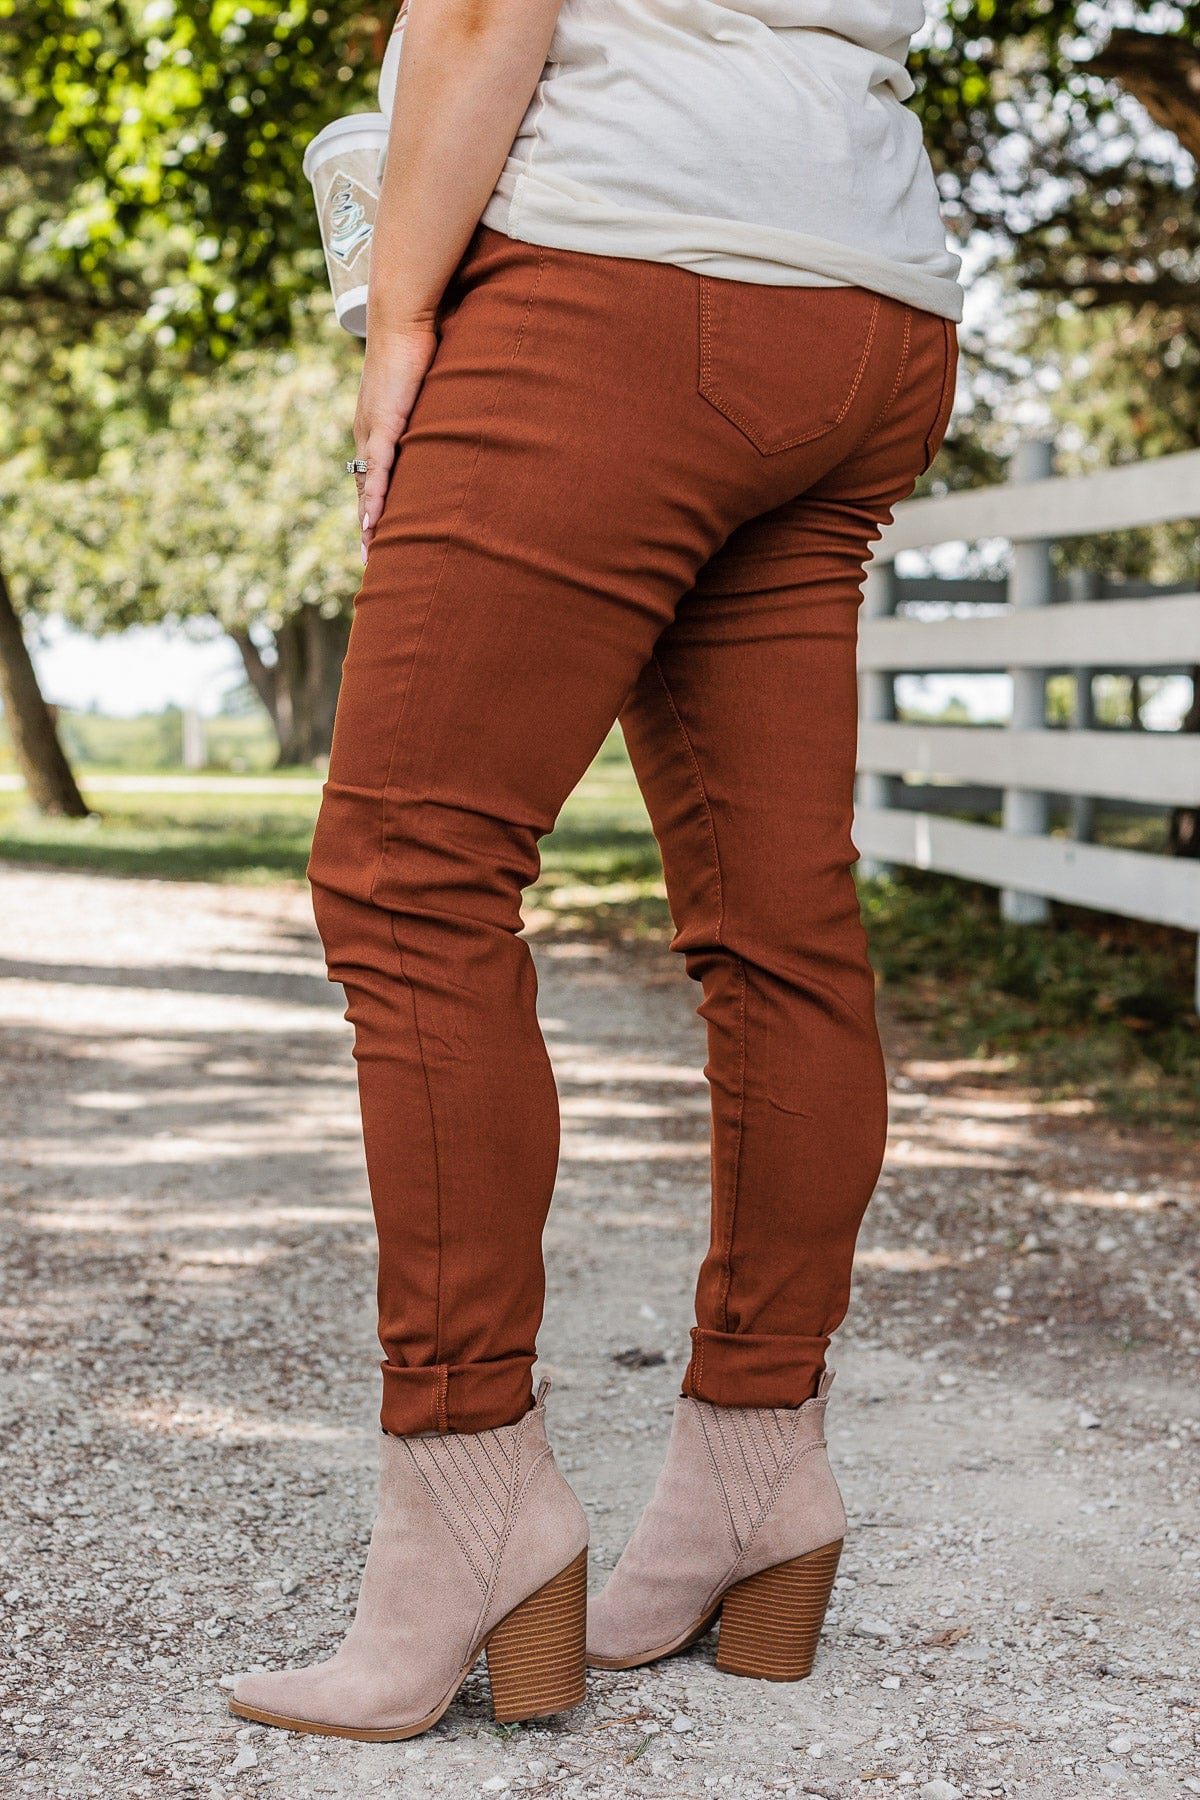 Women's Plus Size Mid Rise Jeggings from ROYALTY – Royalty For me